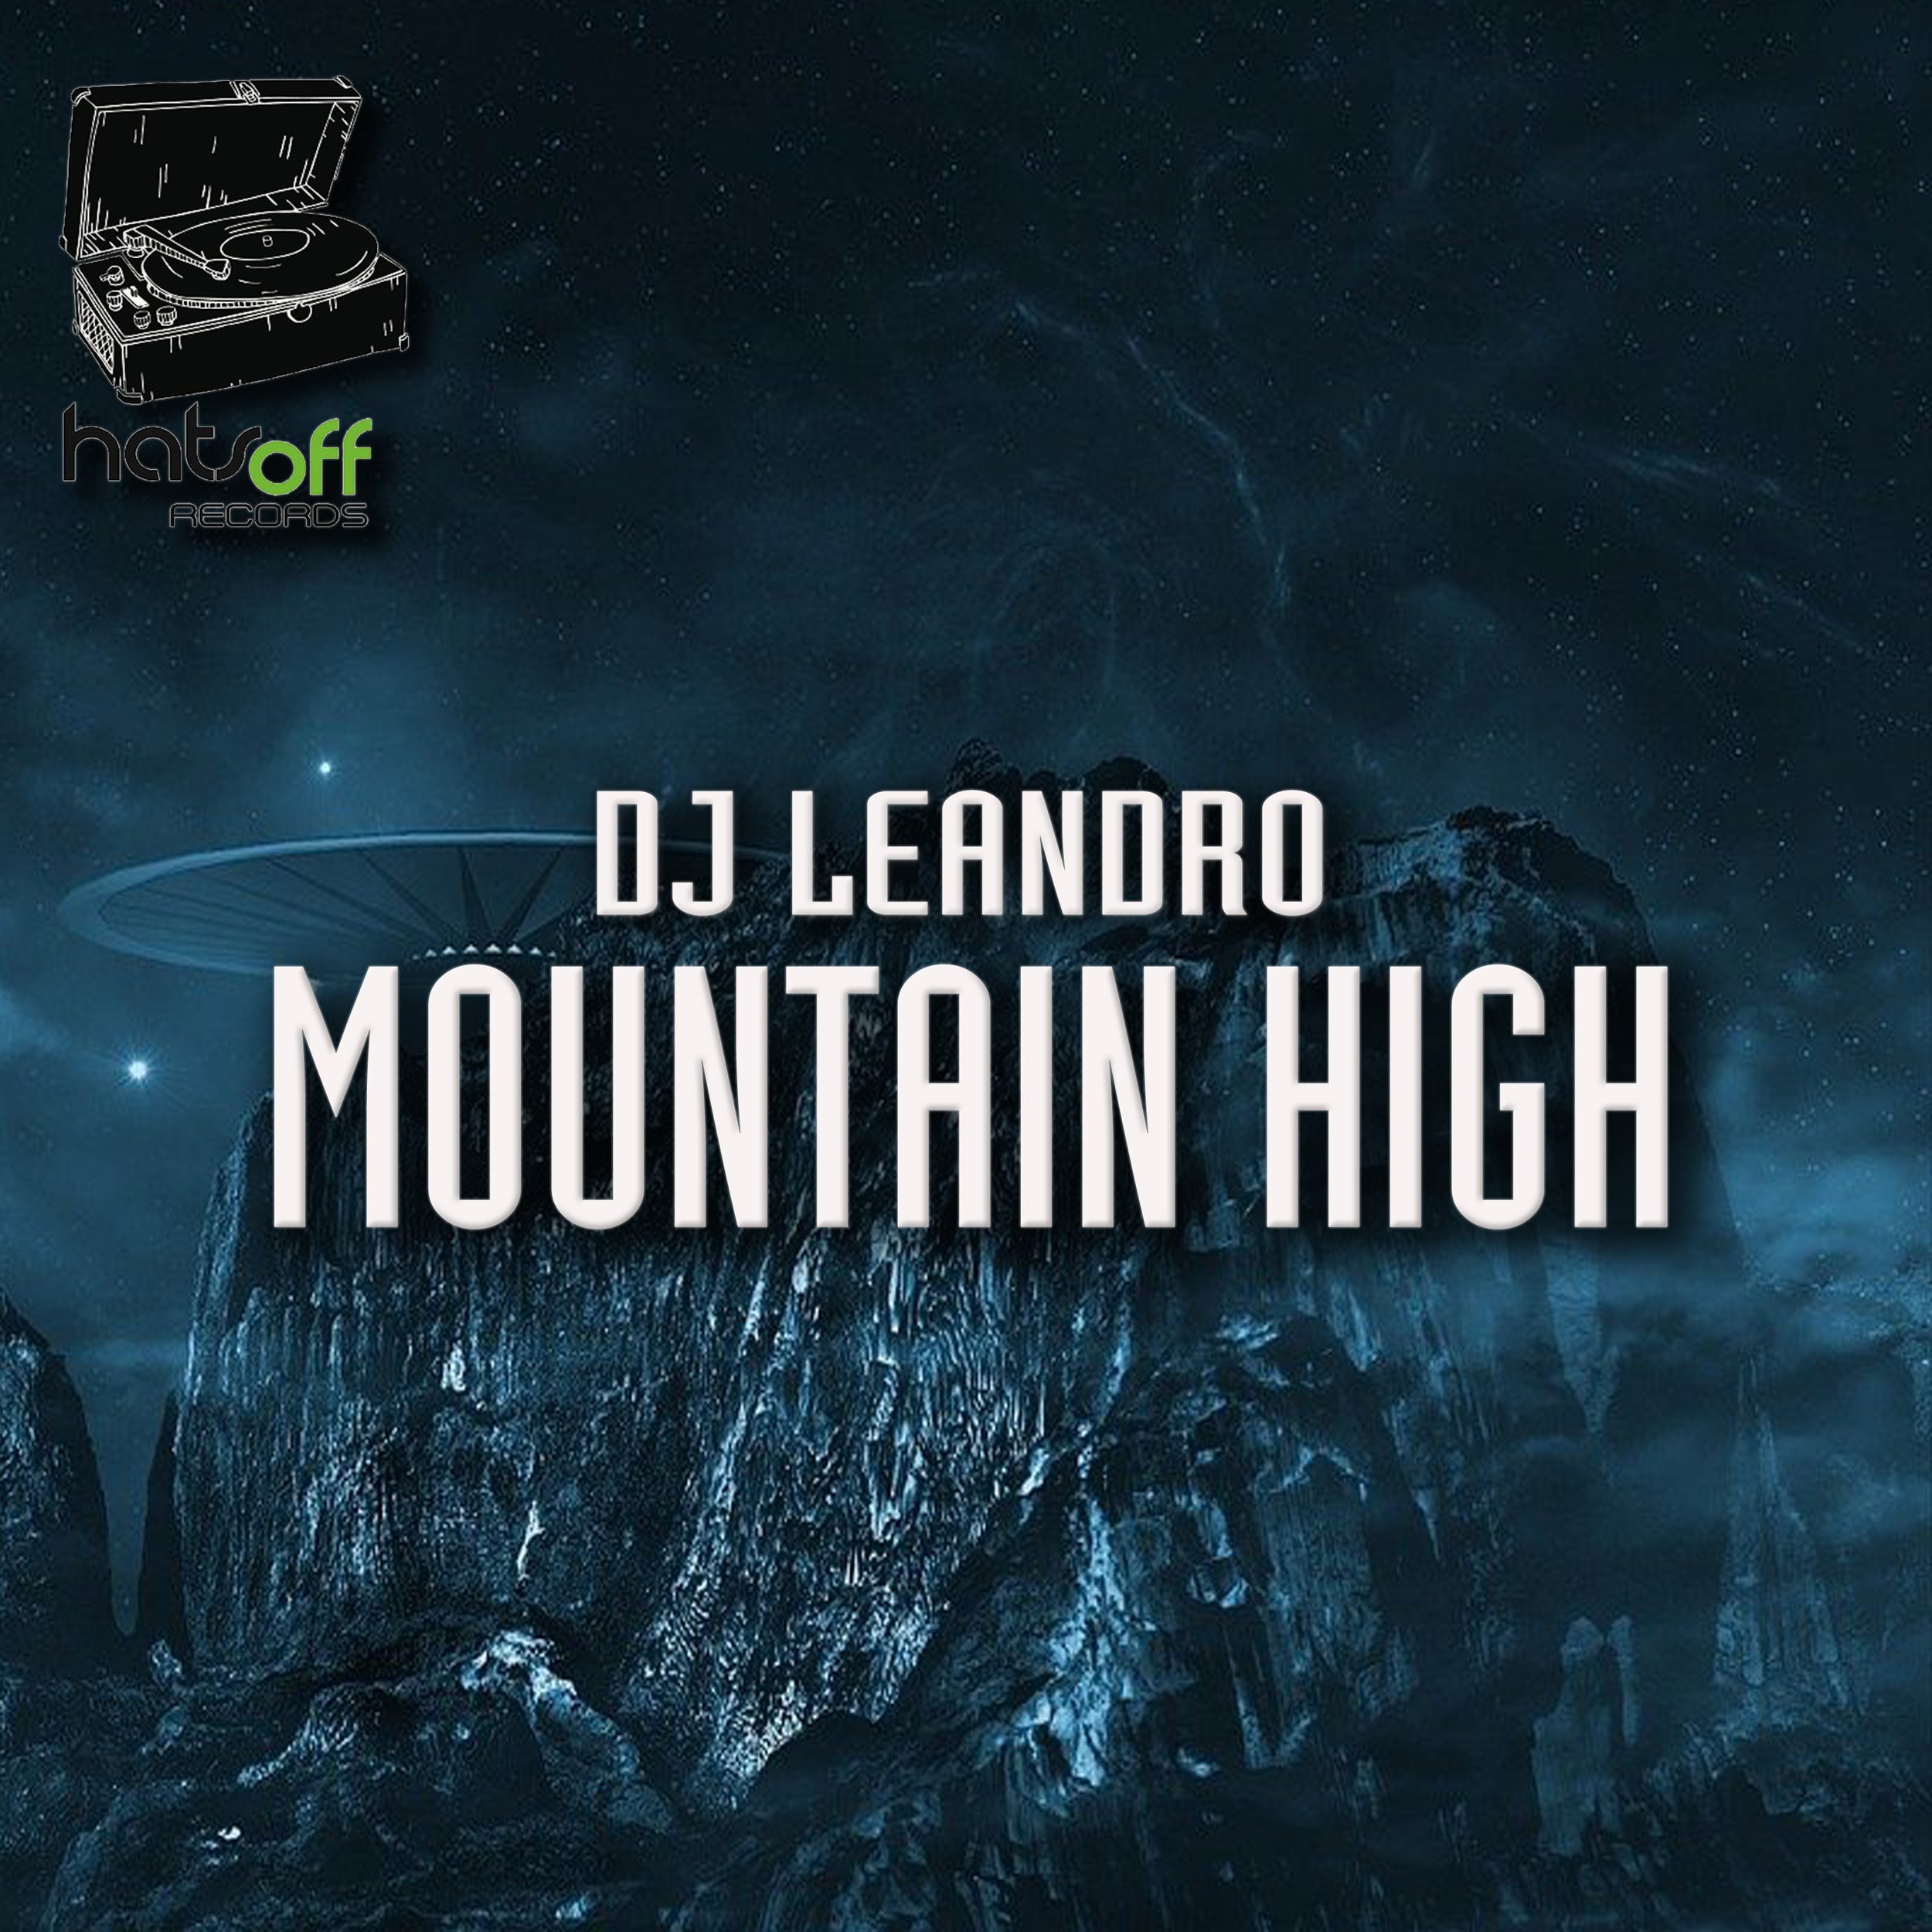 Mountain High (Hats Off Records)